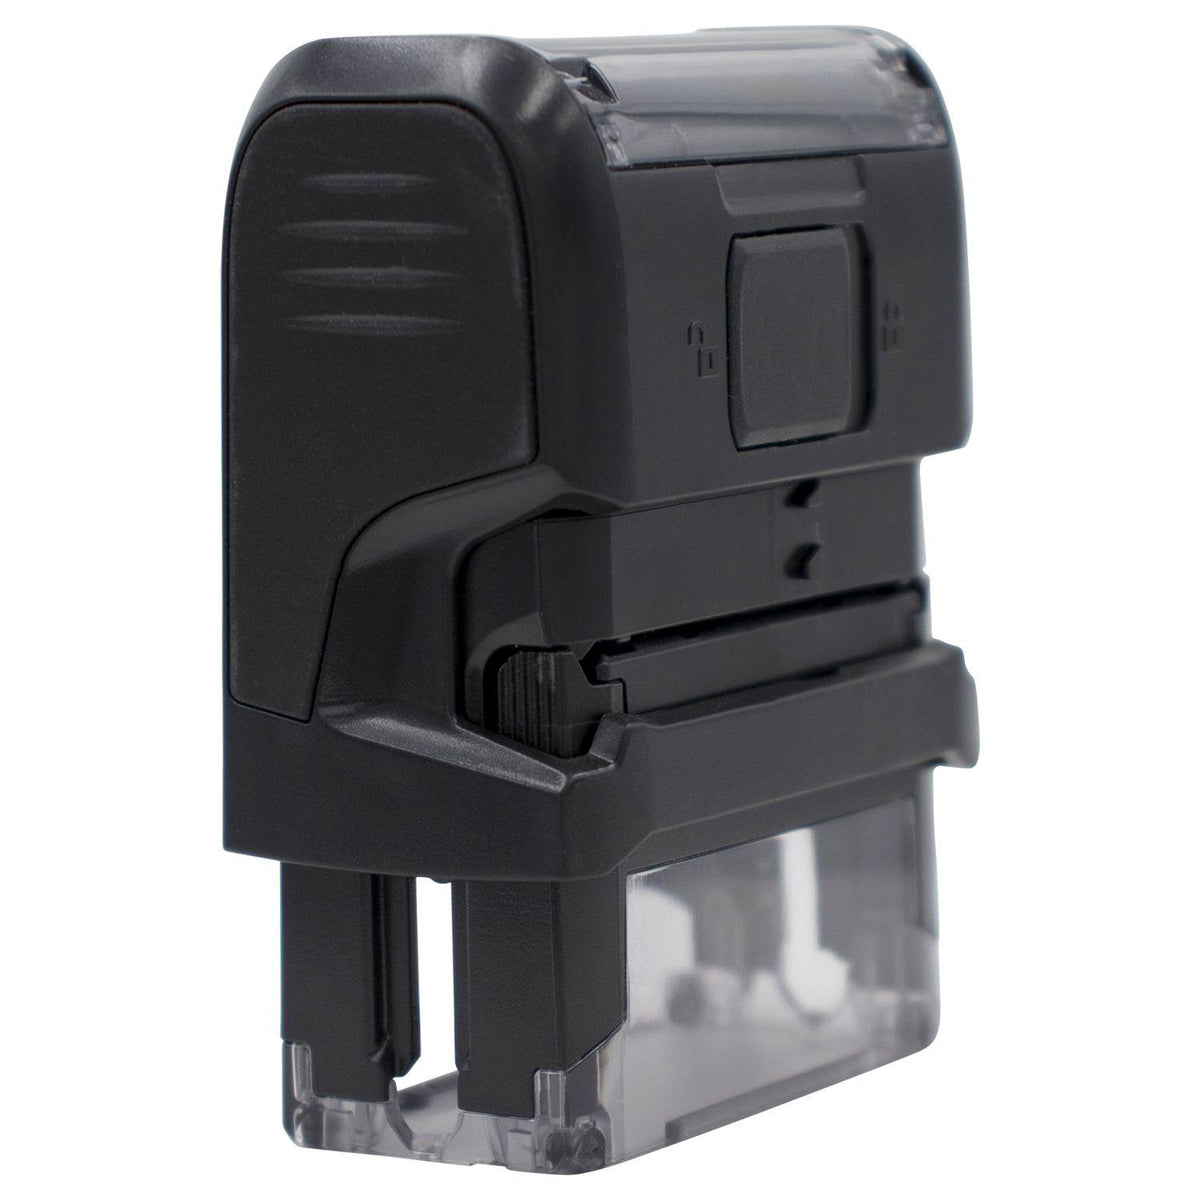 Large Self-Inking Refused Stamp - Engineer Seal Stamps - Brand_Trodat, Impression Size_Large, Stamp Type_Self-Inking Stamp, Type of Use_General, Type of Use_Office, Type of Use_Postal &amp; Mailing